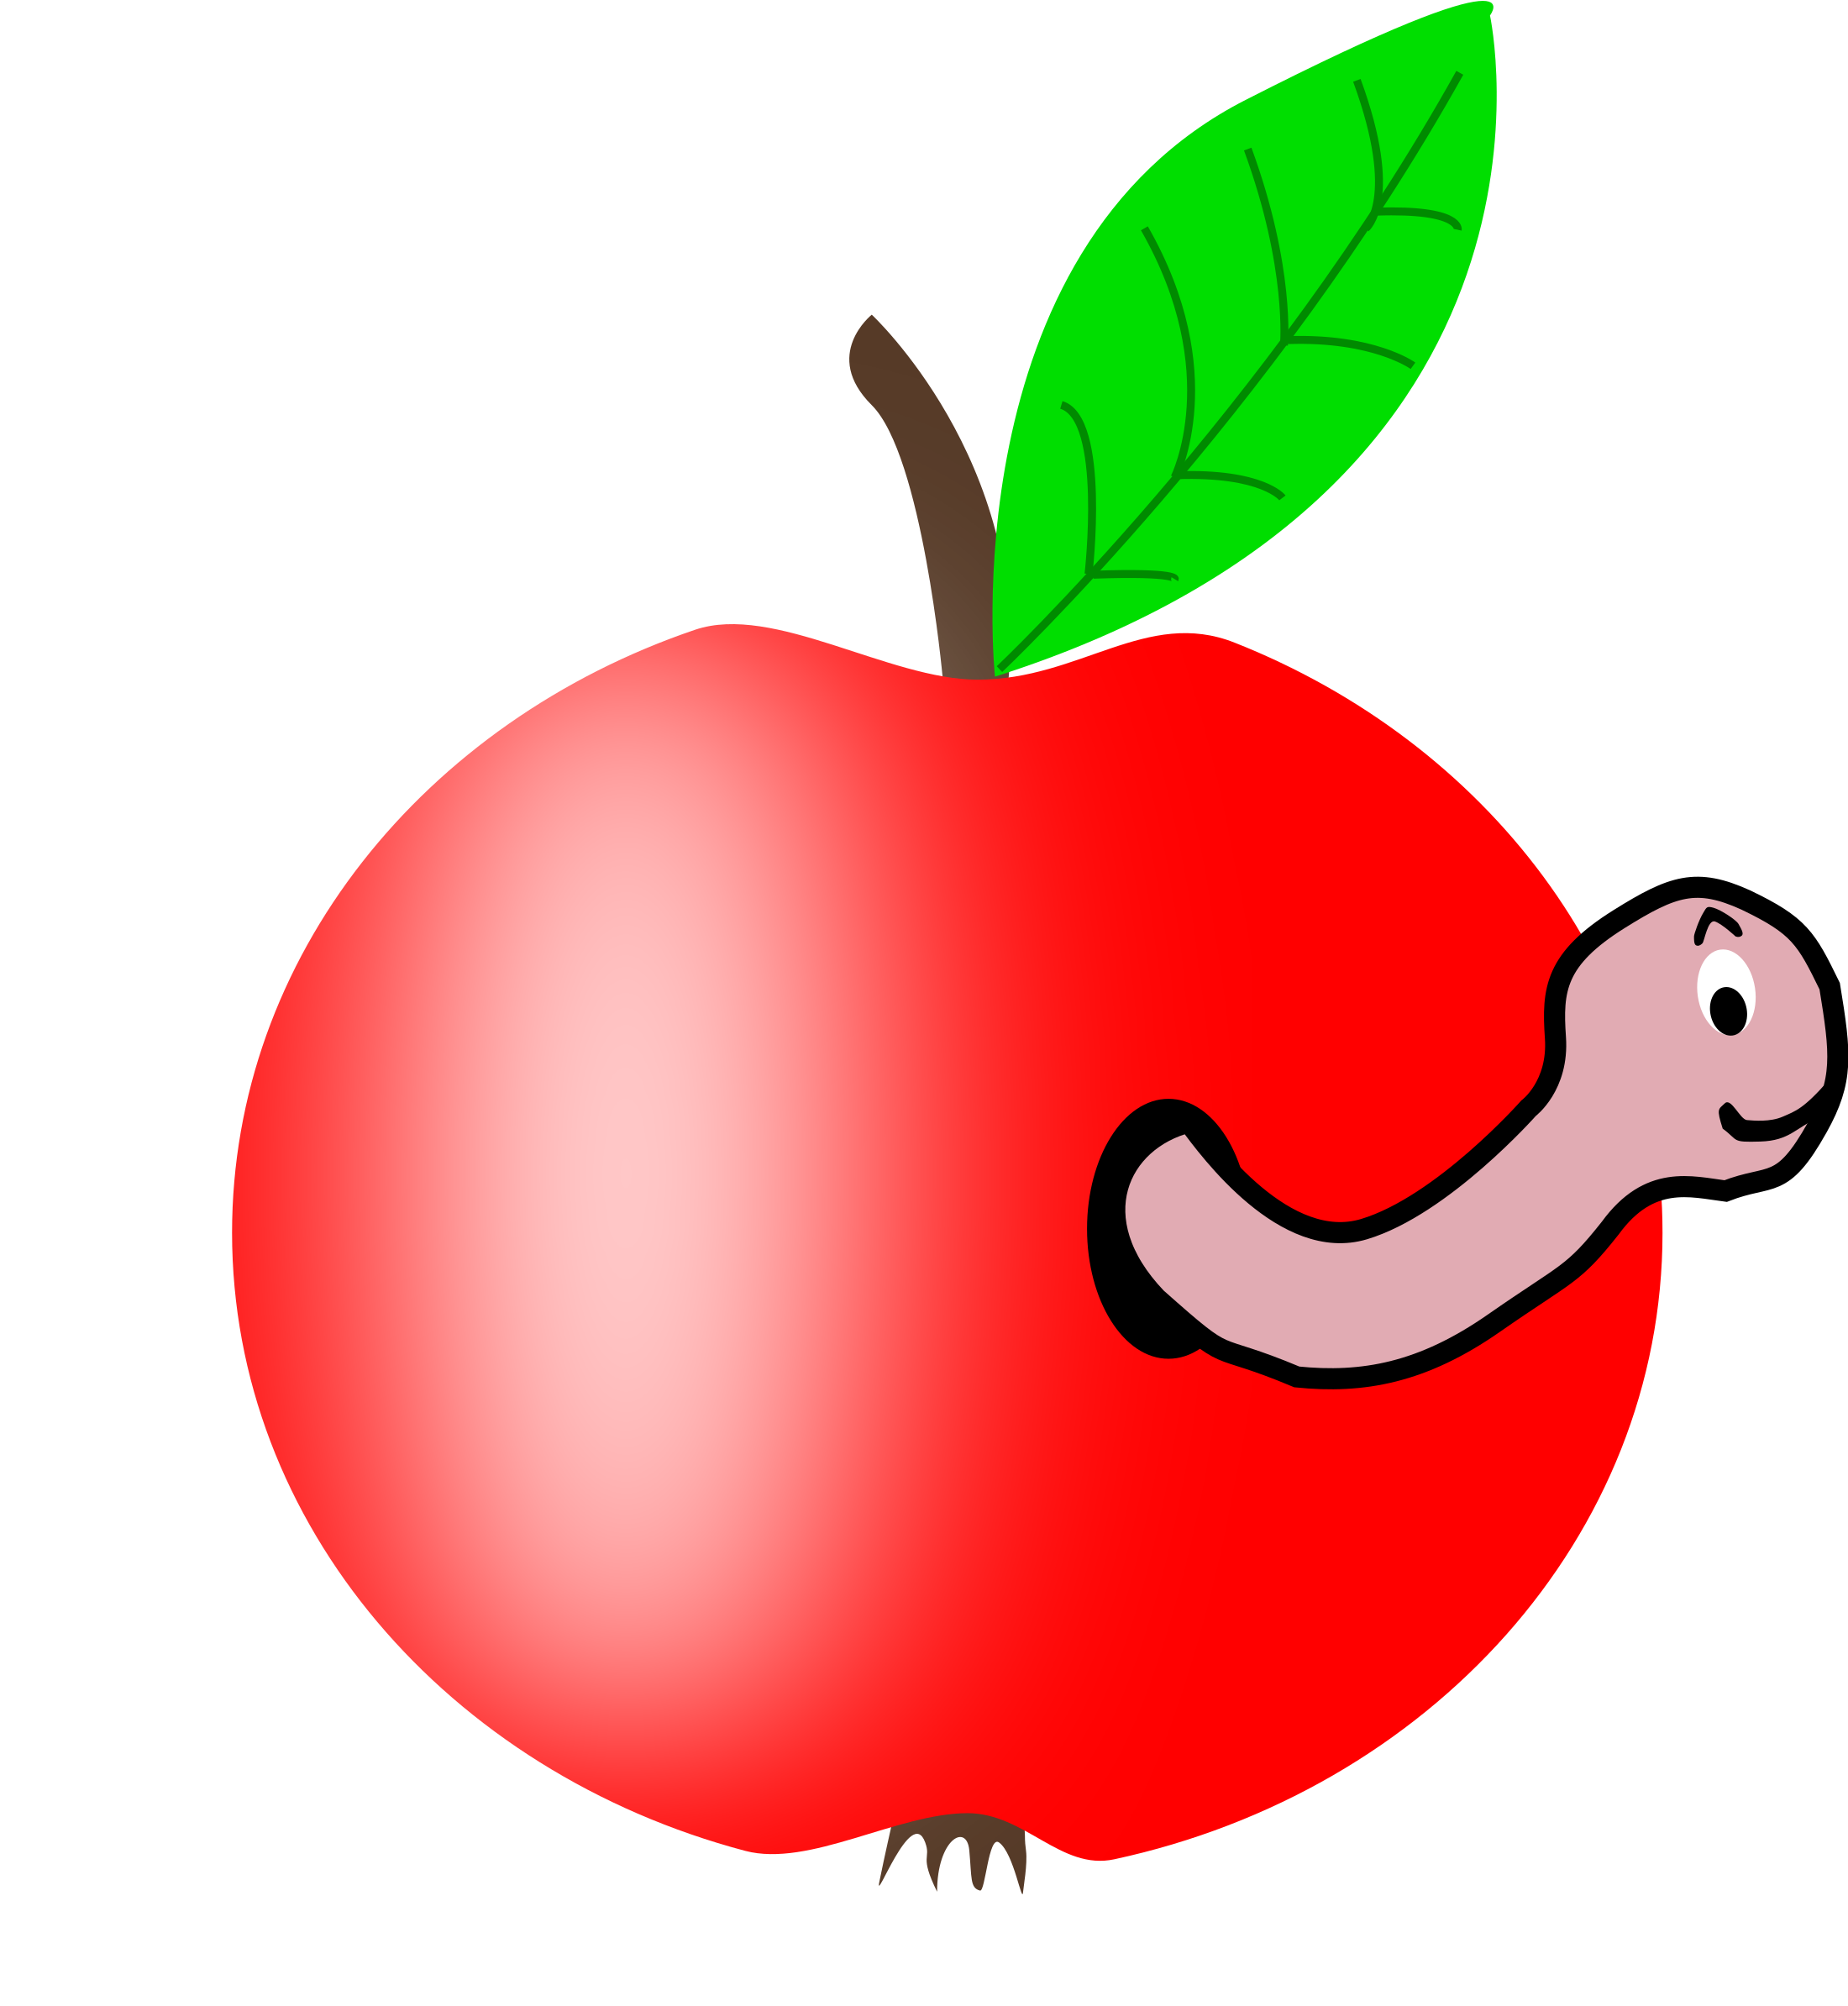 Big Image - Apple With A Worm (2200x2400)